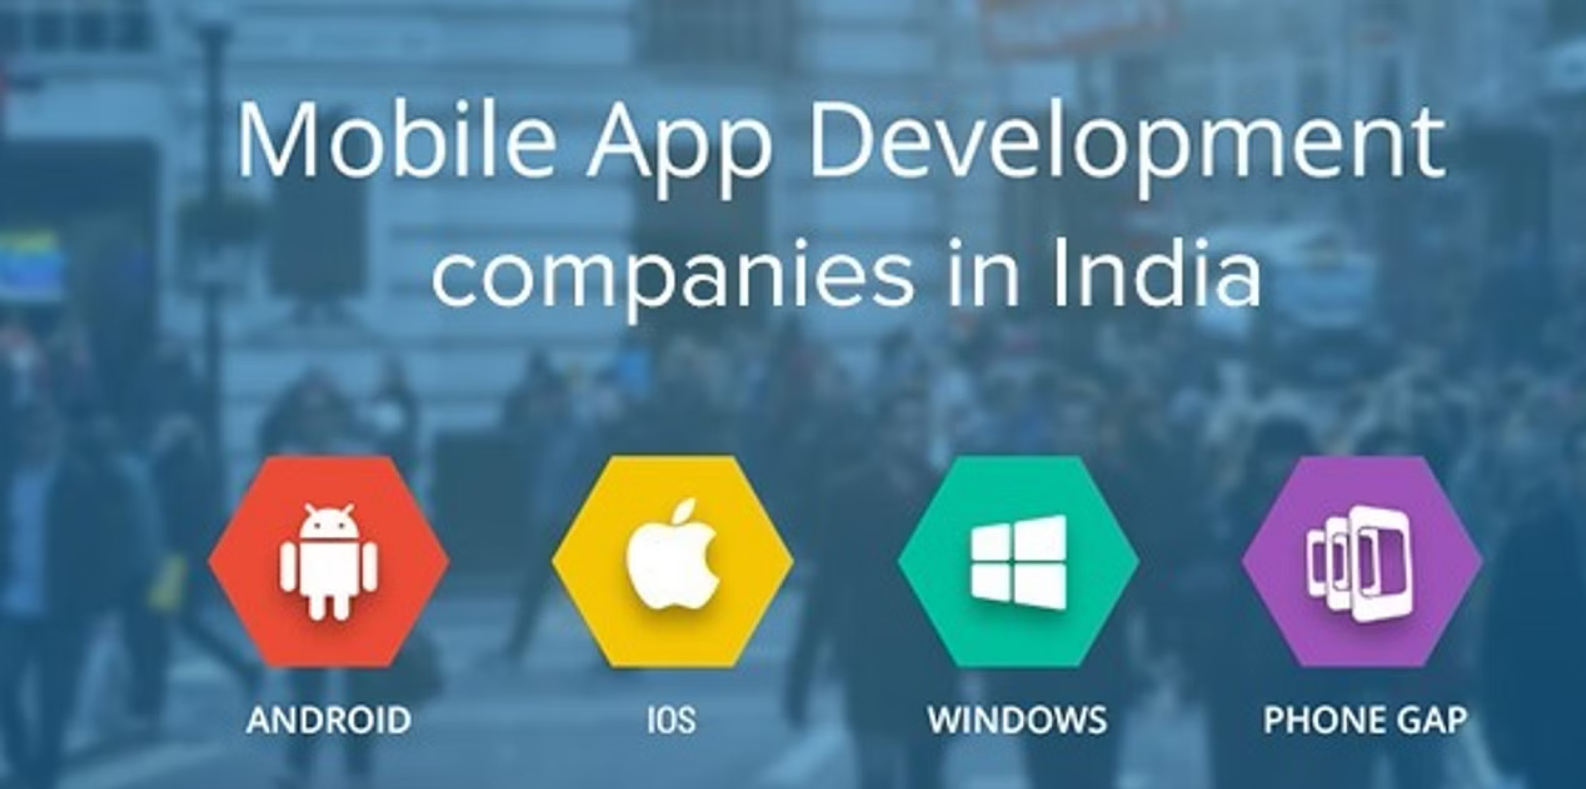 #1 Mobile App Development Company in Delhi,Mobile Apps India Mobile Firm is one of the most trusted mobile app development company in Delhi, India, USA & UK, We are expertised in building android, iOS, & IoT mobile apps.